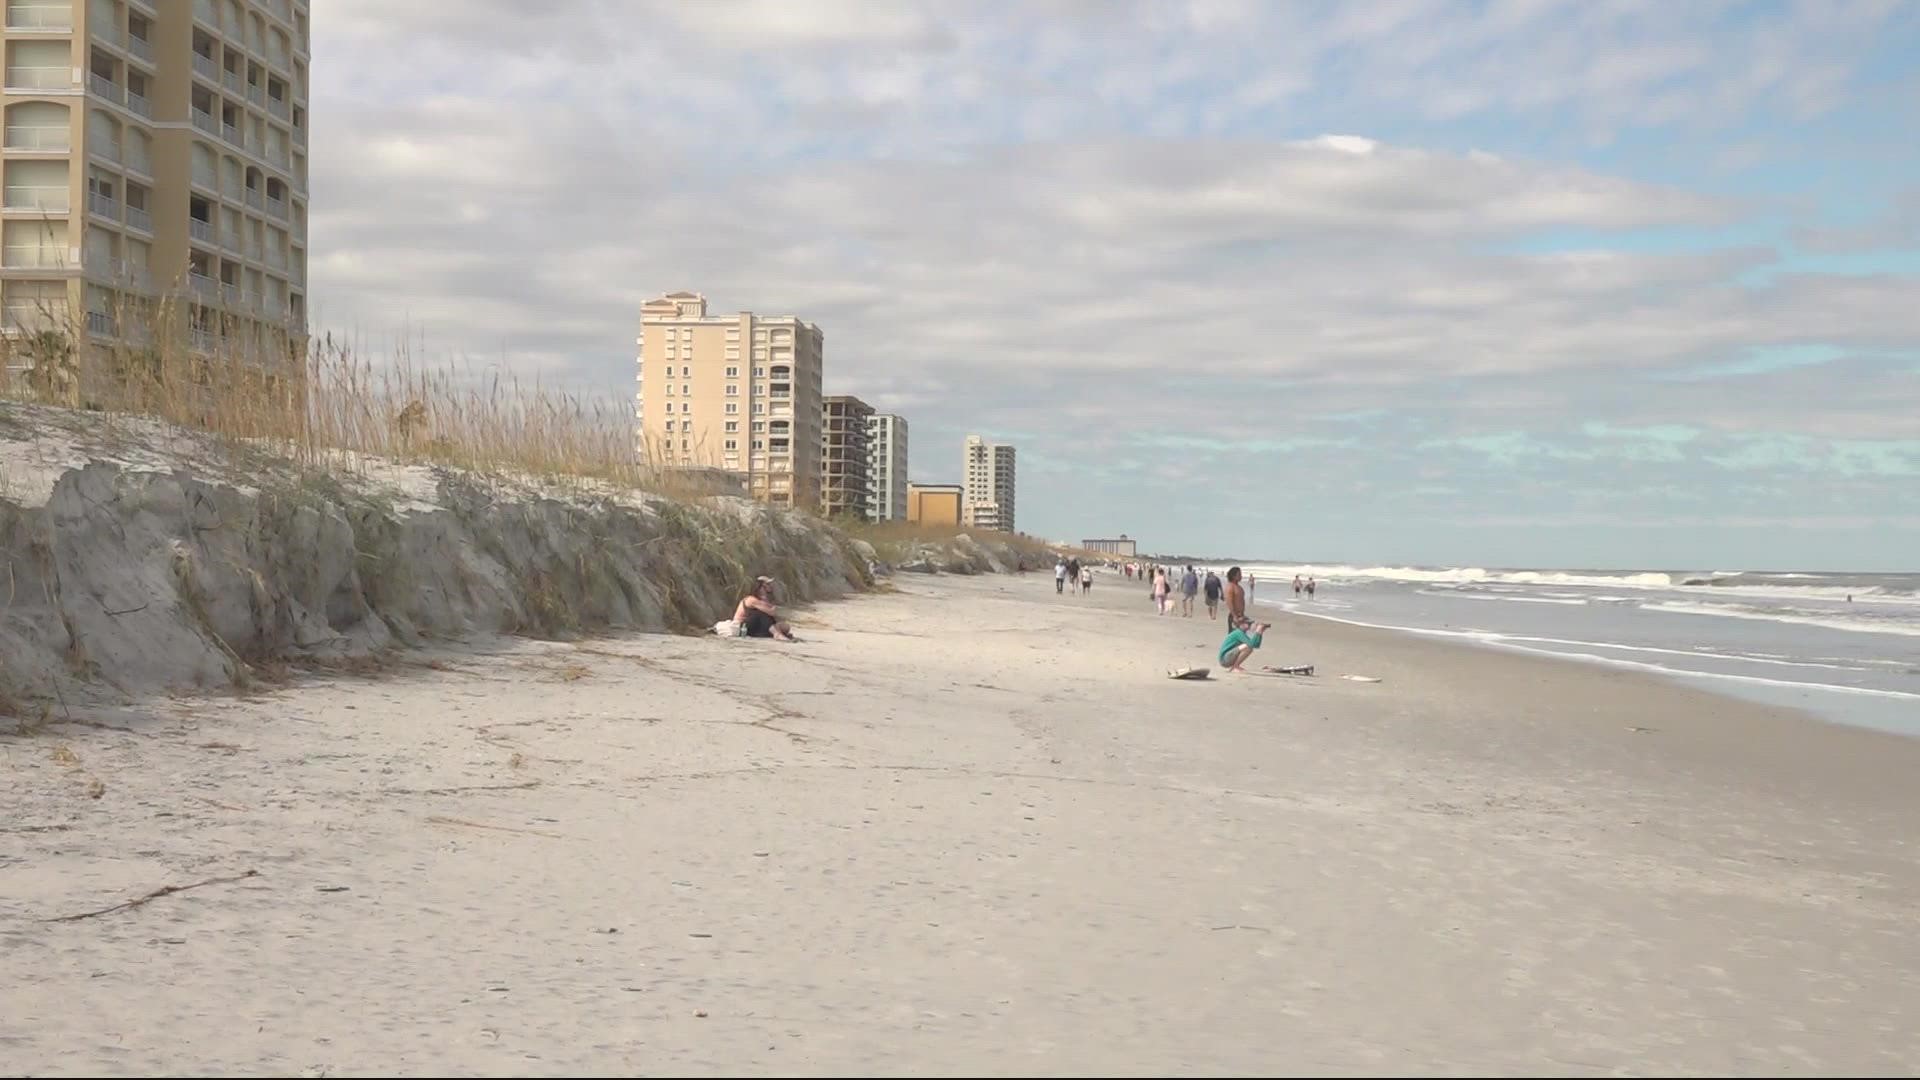 The dunes on average lost between 5-10 ft. following Hurricane Ian, according to a beach marine expert.